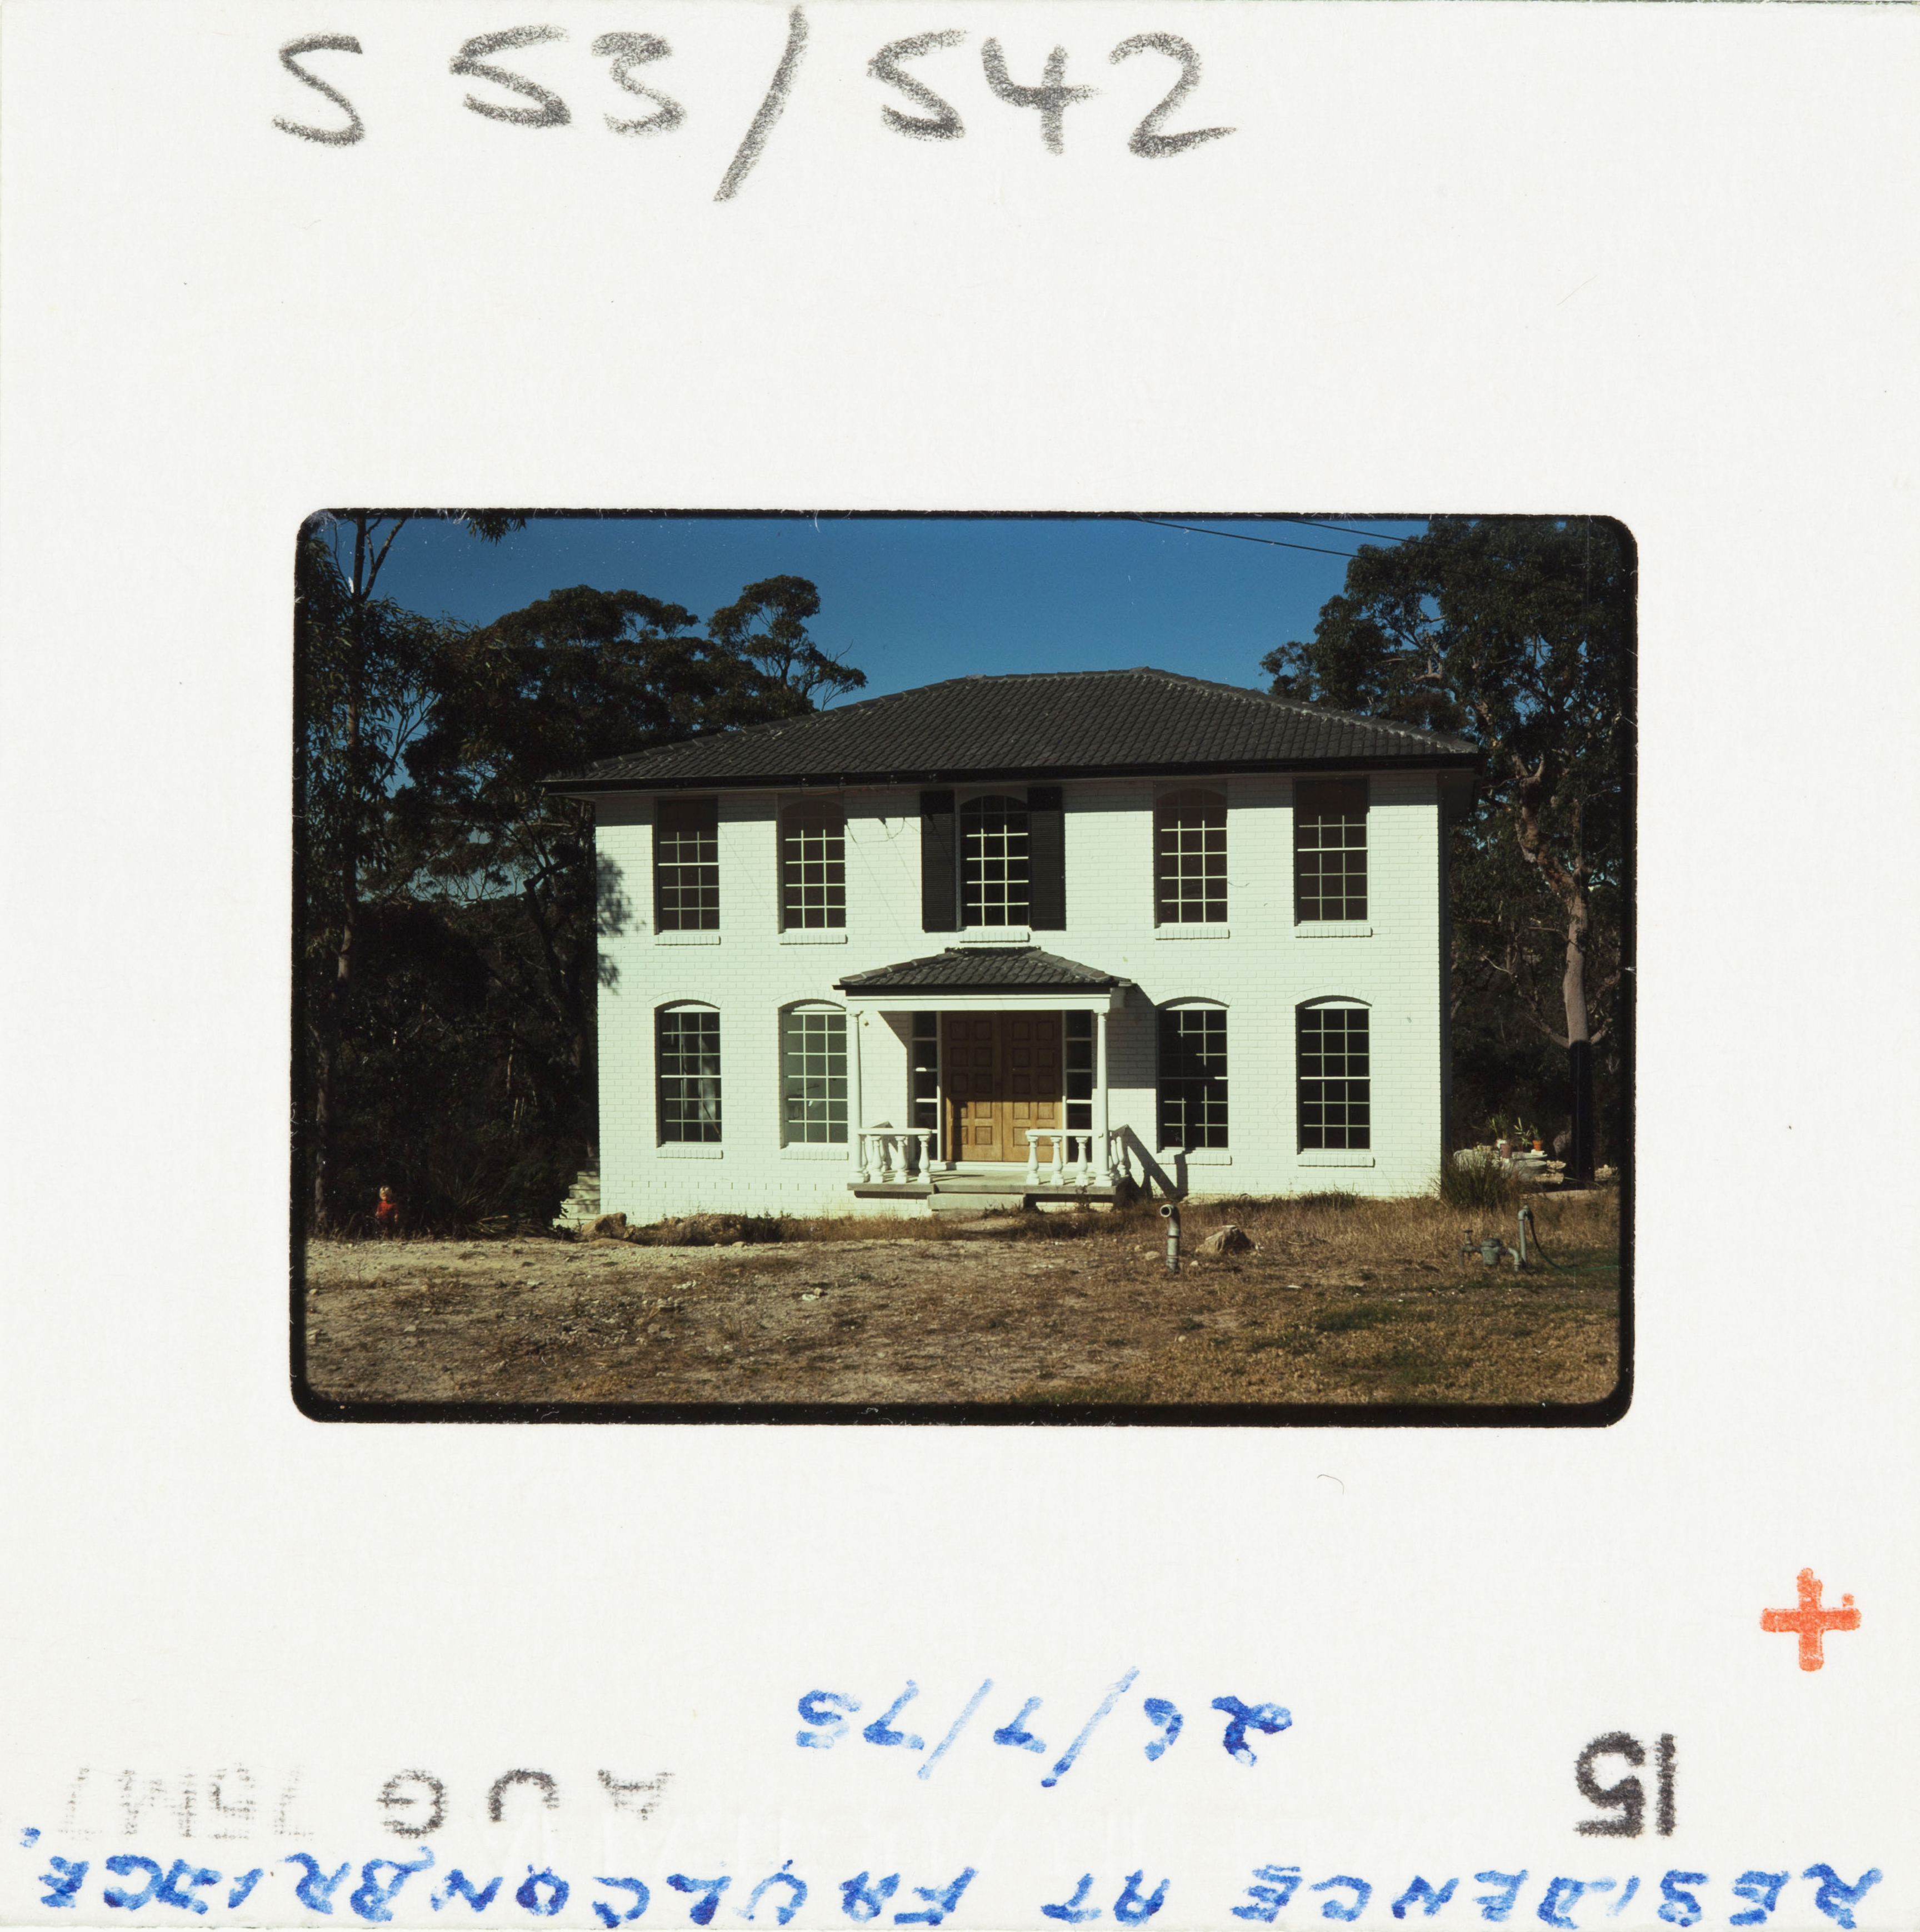 A 70s Kodak colour slide; a white brick house newly built with dry, grassless front yard.